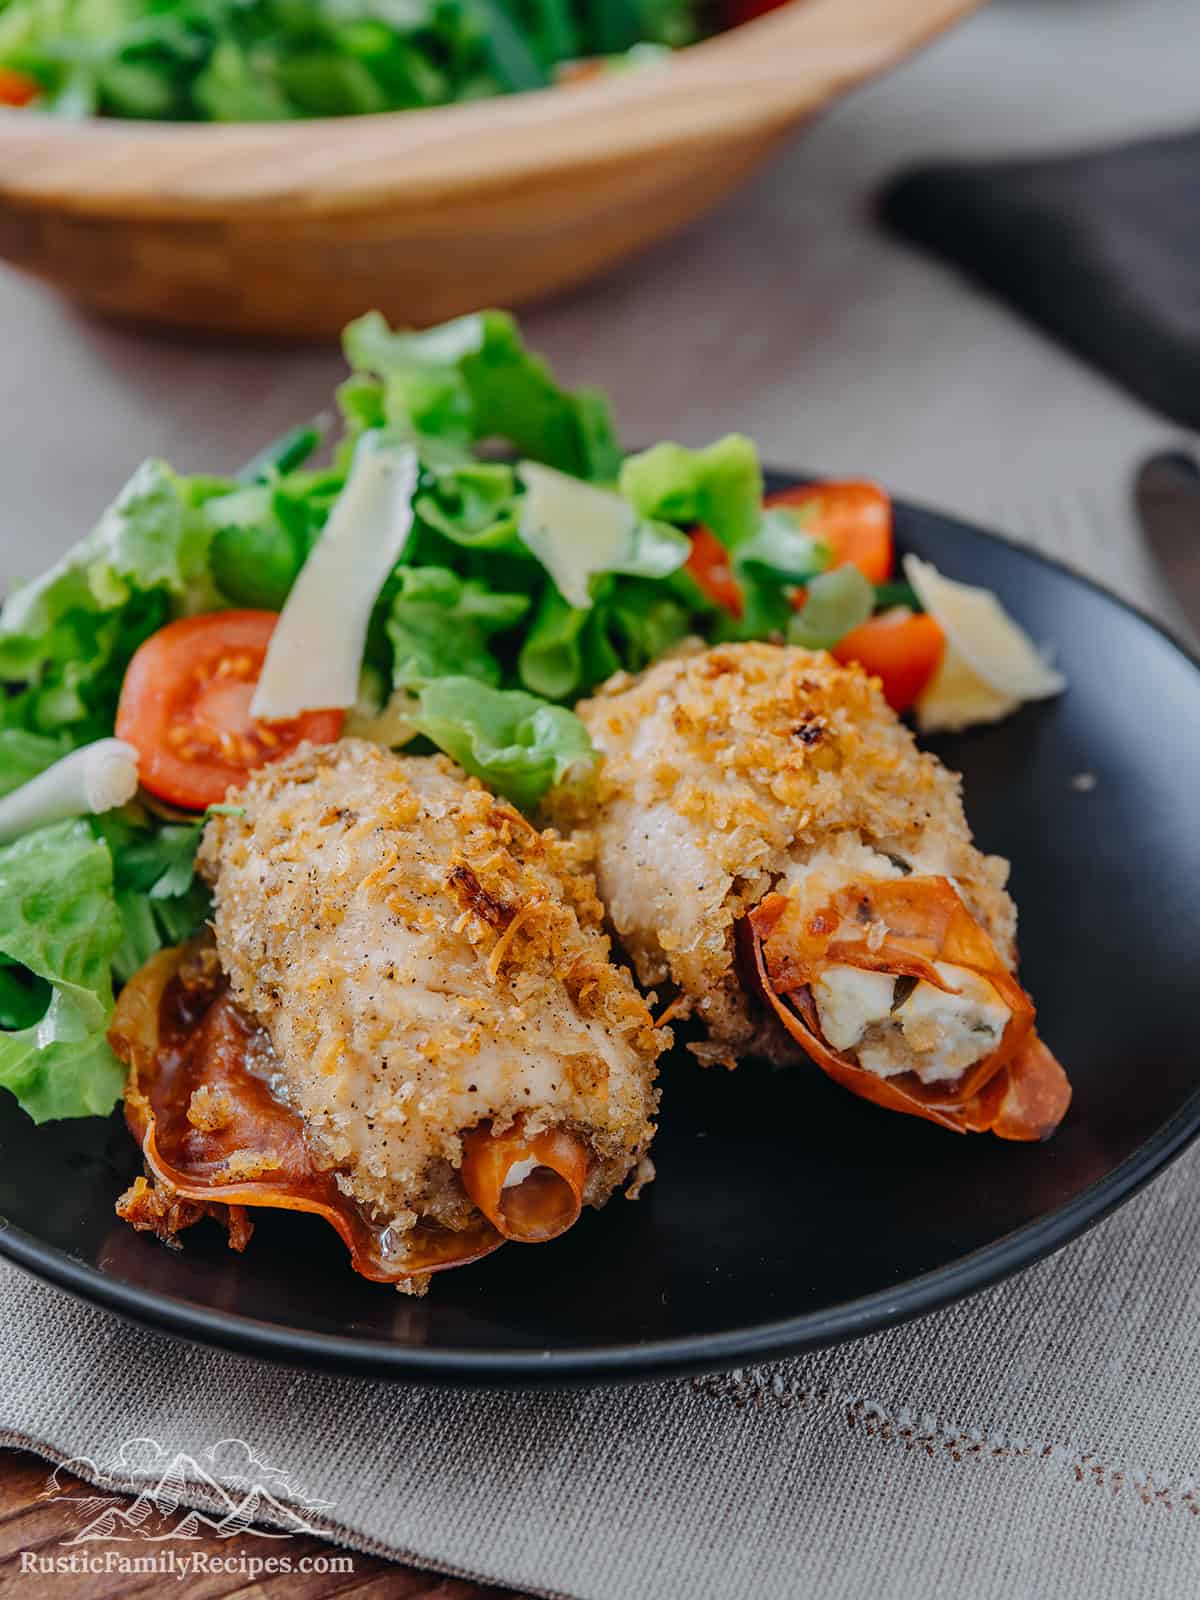 Cooked Chicken Rollatini served with salad